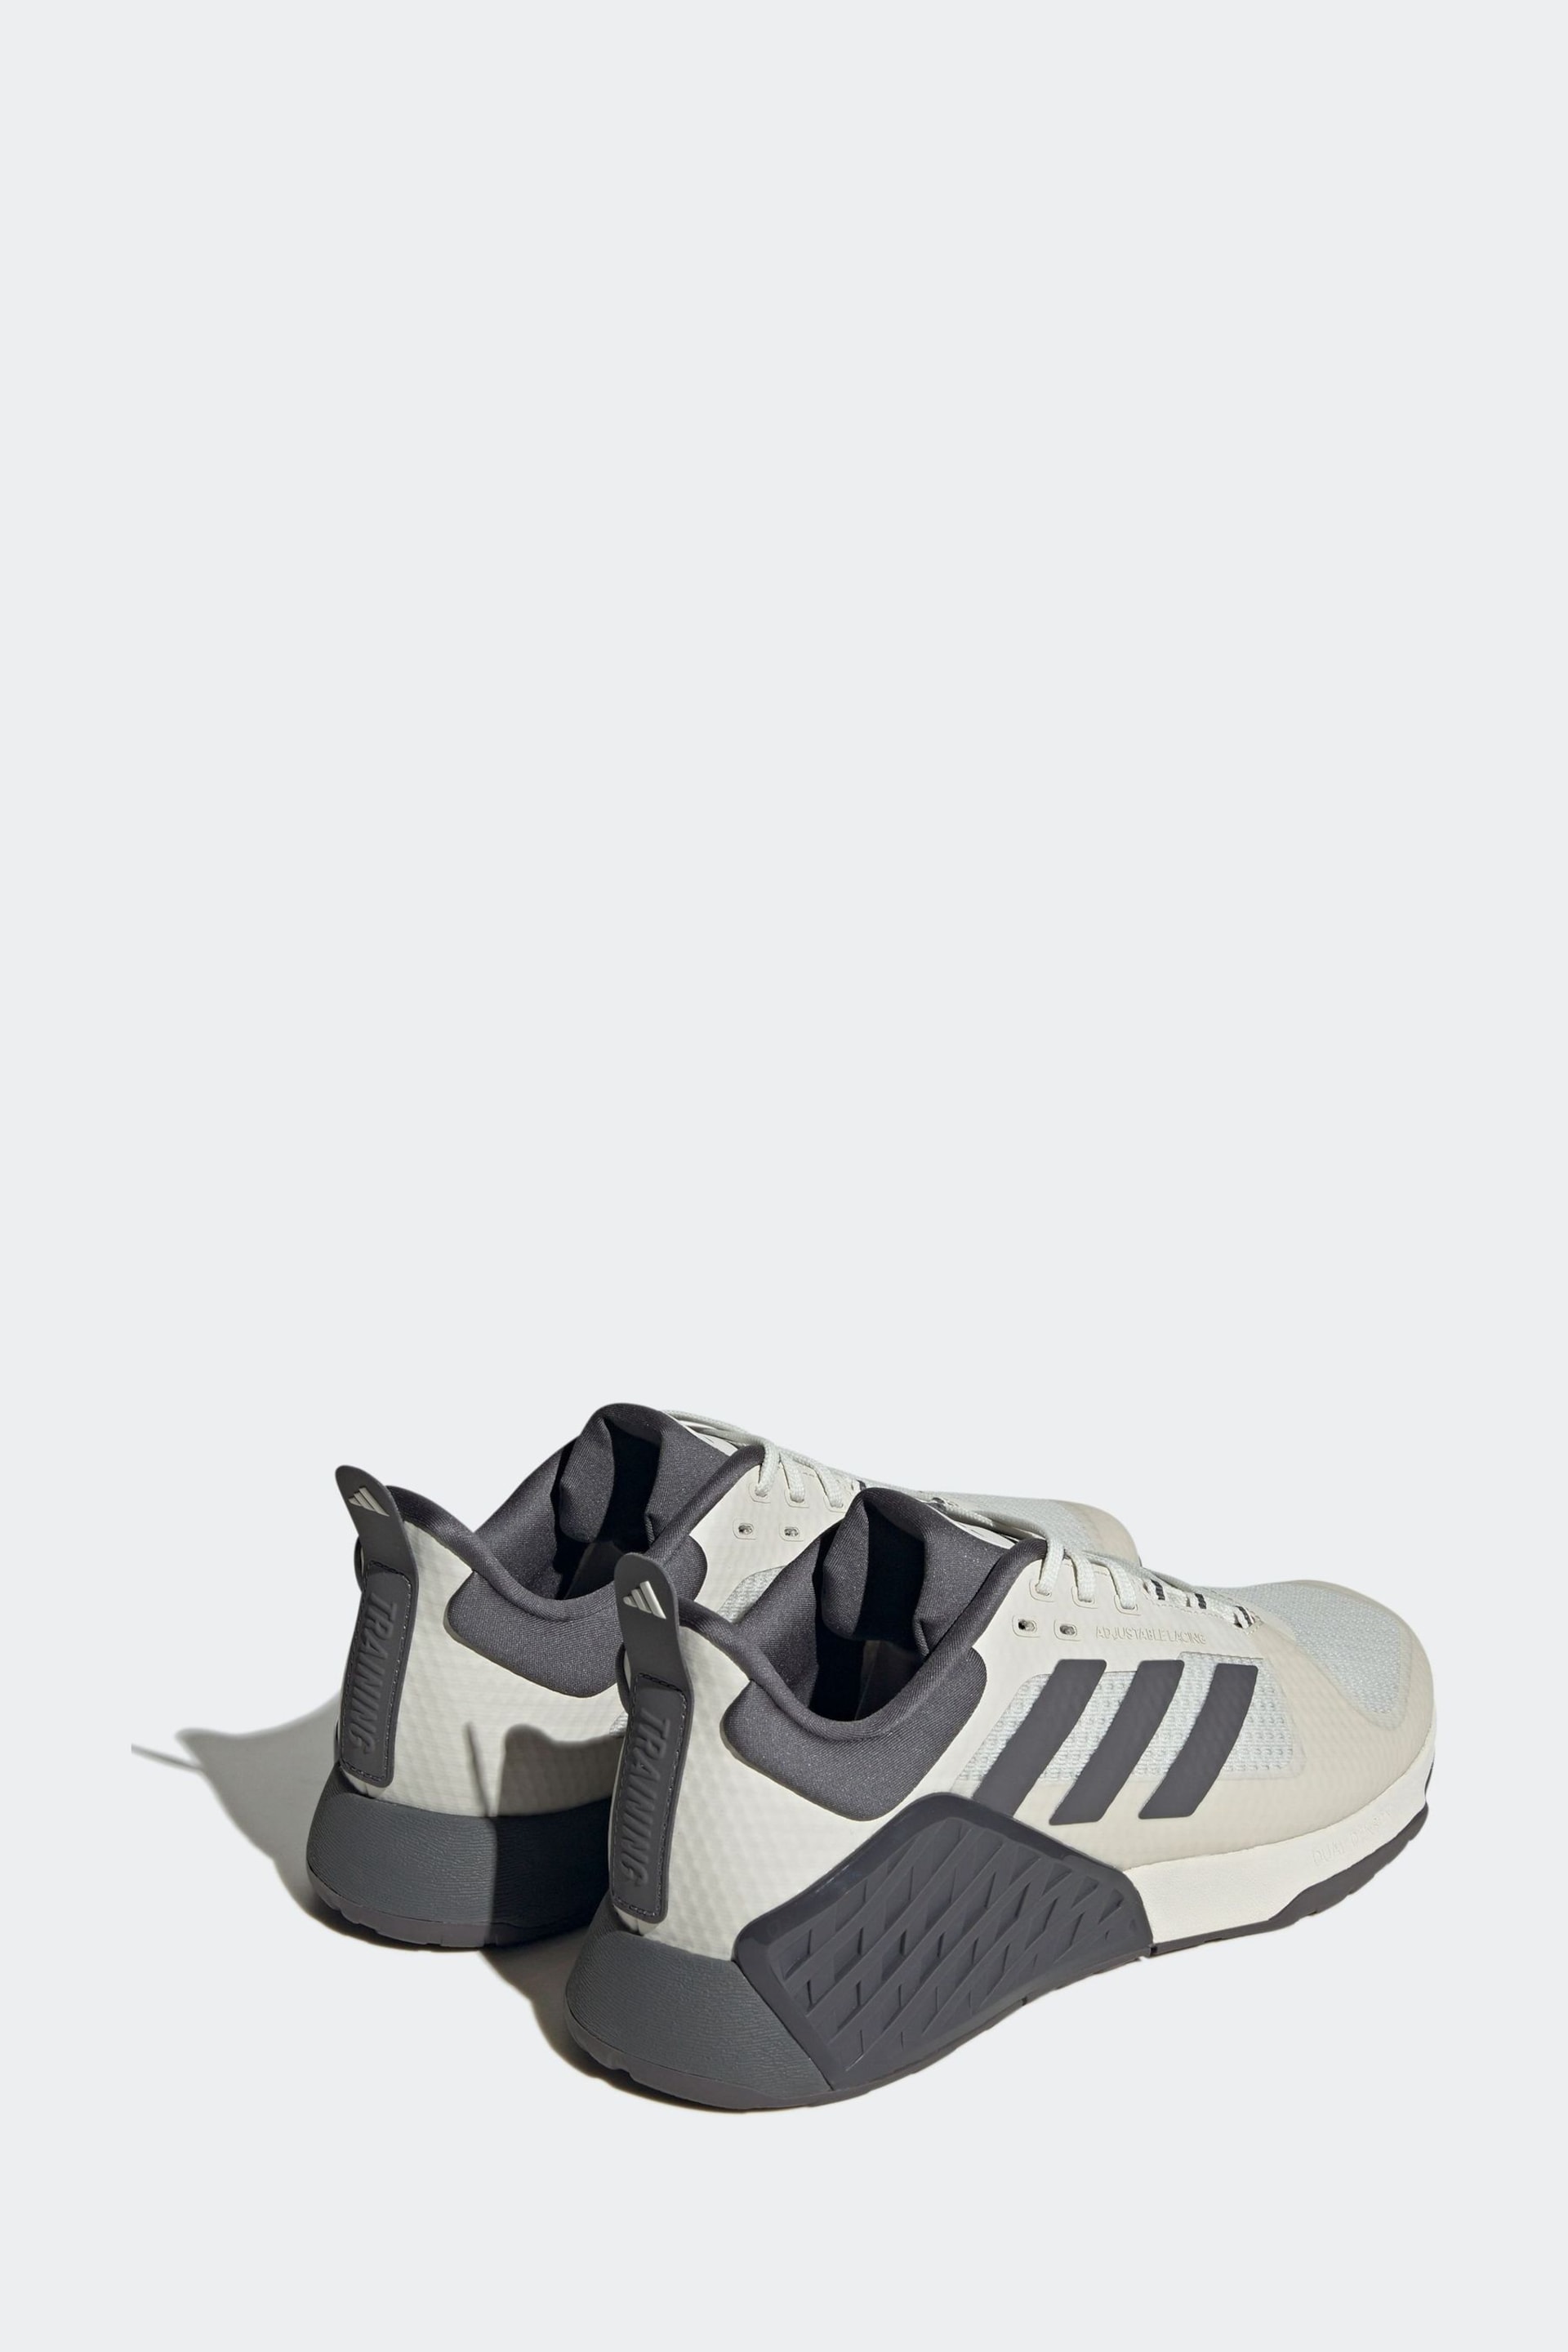 adidas Grey Dropset 2 Trainers - Image 5 of 10